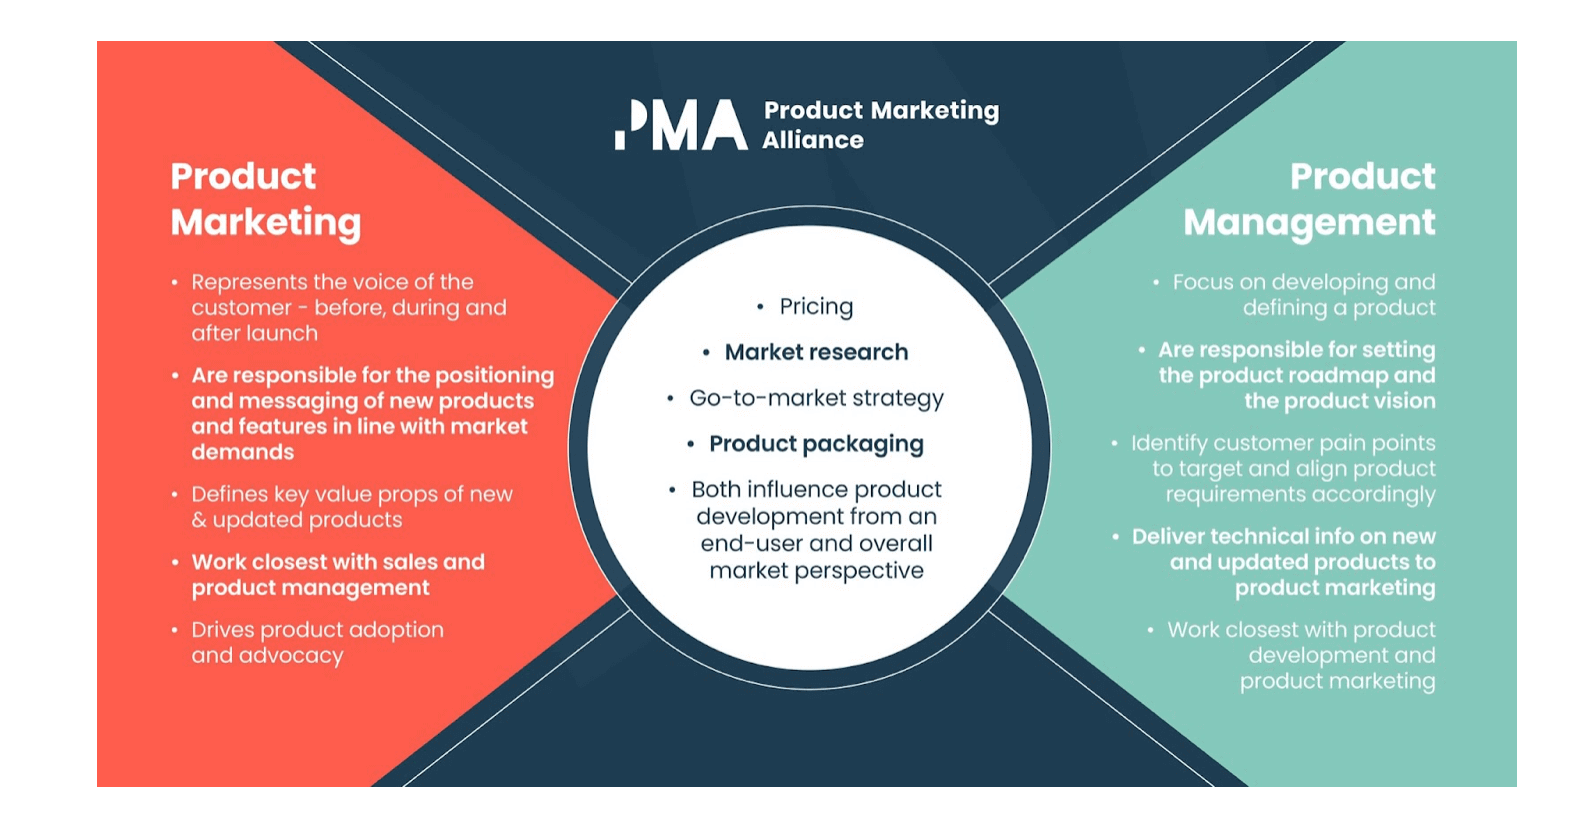 An image showing the differences between product marketing and product management. Product marketing represents the voice of the customer, before, during, and after launch. They are responsible for the positioning and messaging of new products and features in line with market demands. They define key value props of new and updated products, work closest with sales and product management, and drive product adoption and advocacy. Product management focuses on developing and defining a product, are responsible for setting the product roadmap and the product vision, identify customer pain points to target and align product requirements accordingly, deliver technical info on new and updated products to product marketing and work closest with product development and product marketing. But they both work on pricing, market research, go to market strategy, product packaging and both influence product development from an end-user and overall market perspective. 